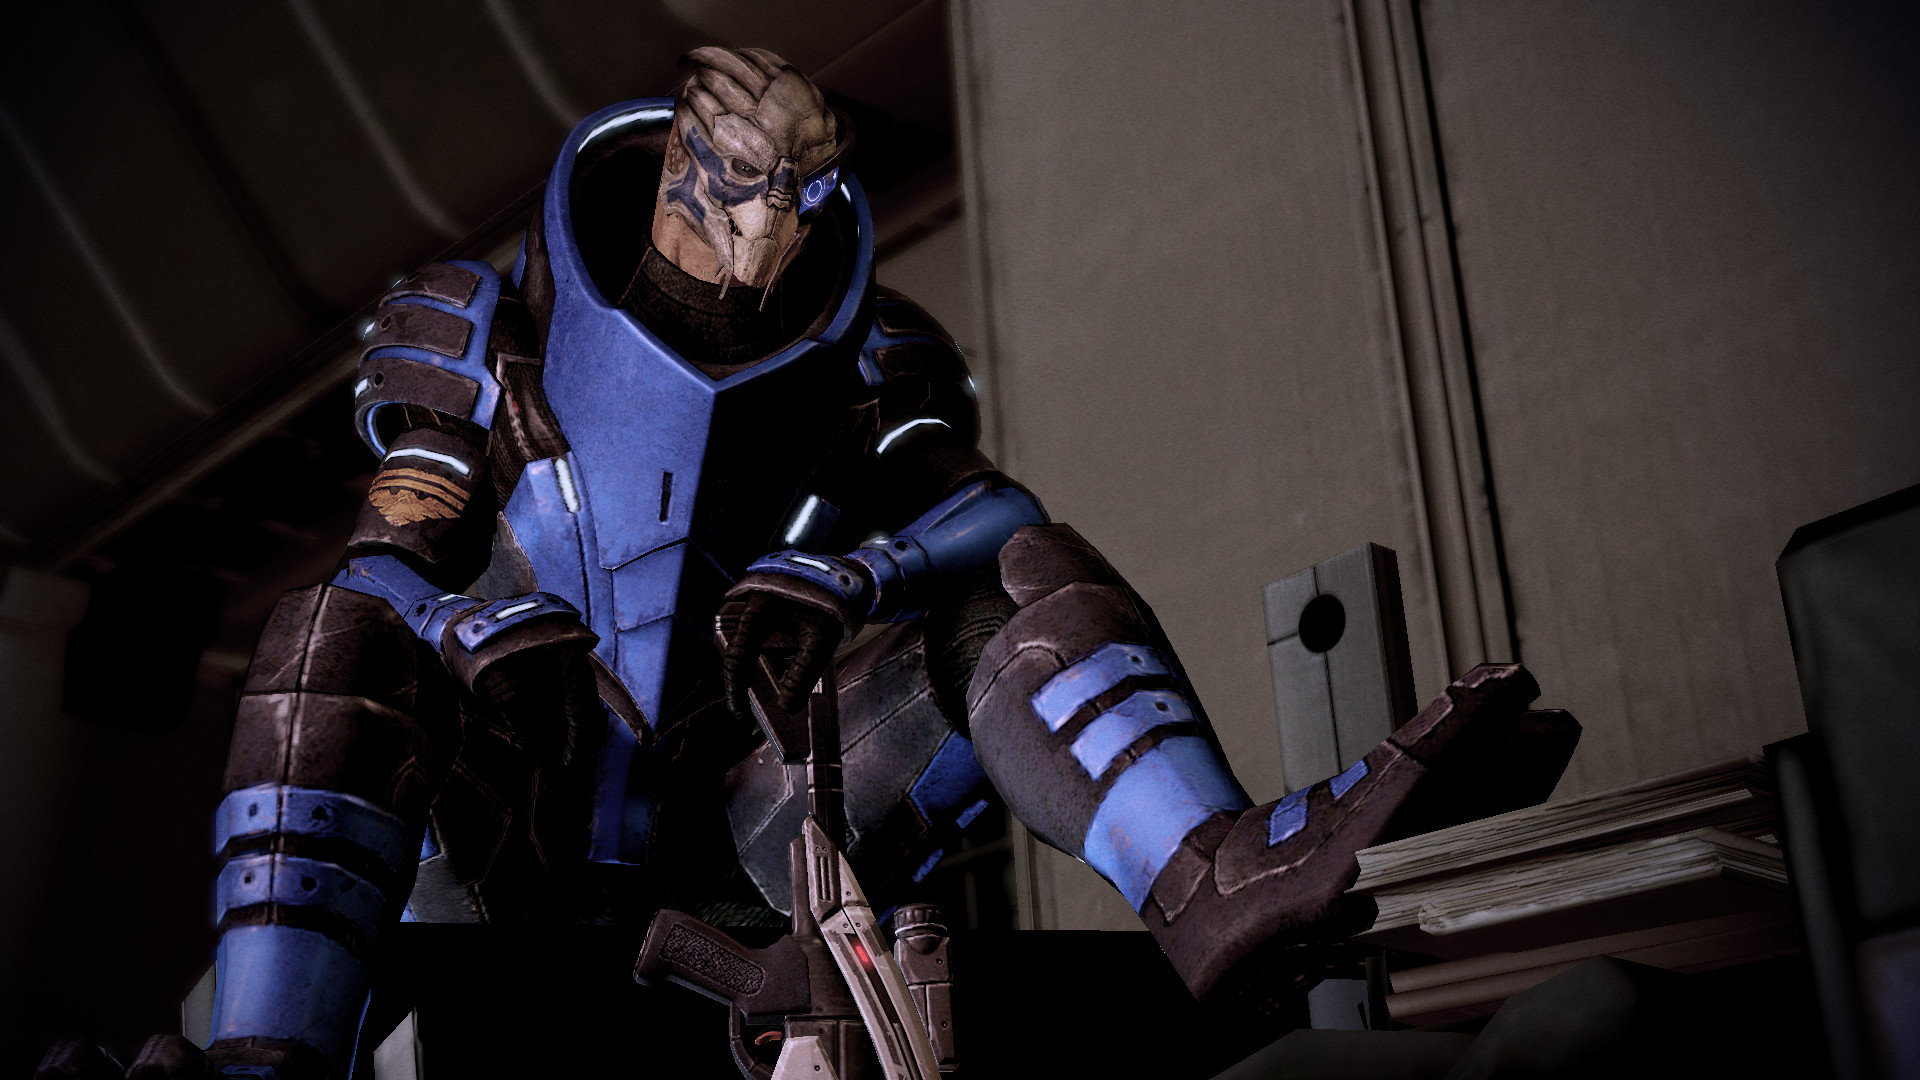 Garrus Vakarian (Mass Effect Trilogy). He's not even “Human”...and he makes it with the ladies (well...FemShep) better than most real men XD – He could be the “poster boy” for the nerd that gets the girl. He knows how to handle a gun, he's a master at sniping, he's funny and great with words...and AMAZING at calibrations. All around Turian bad boy, anyone? ;)